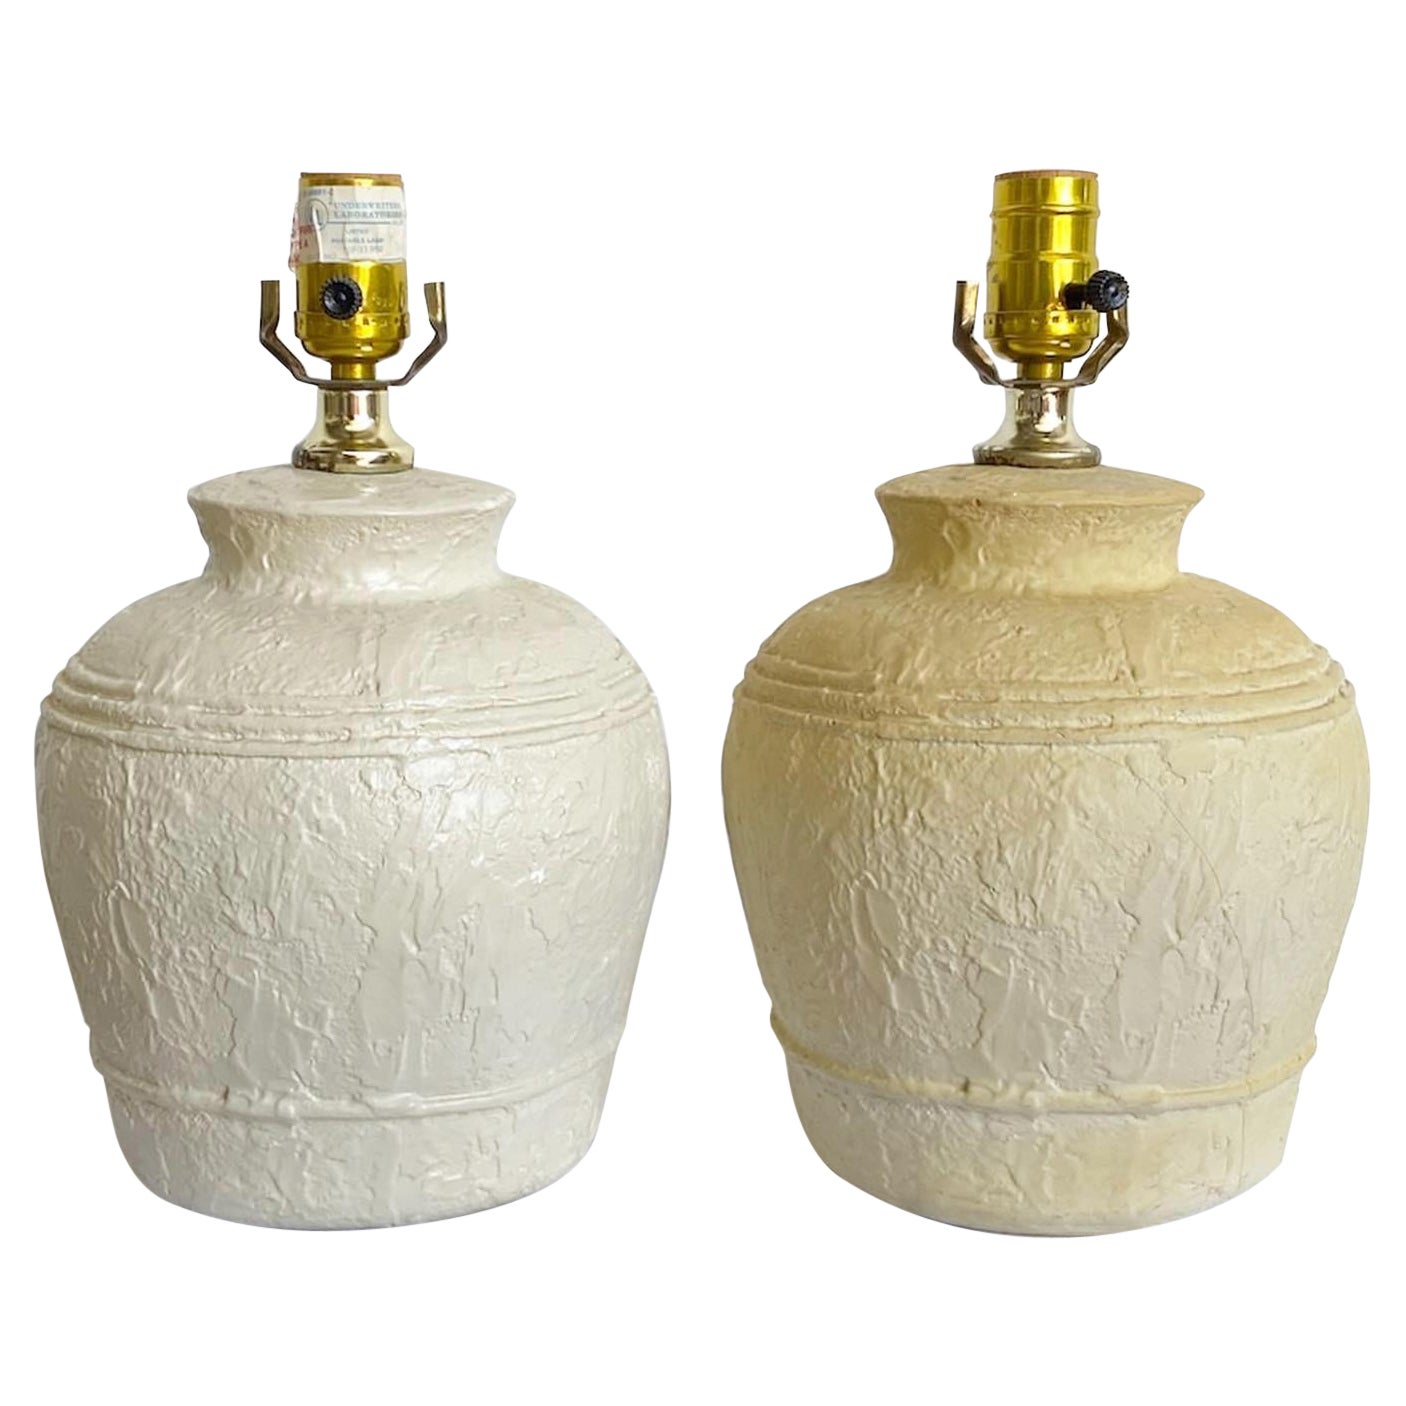 Postmodern Textured Plaster Ginger Jar Table Lamps - a Pair For Sale